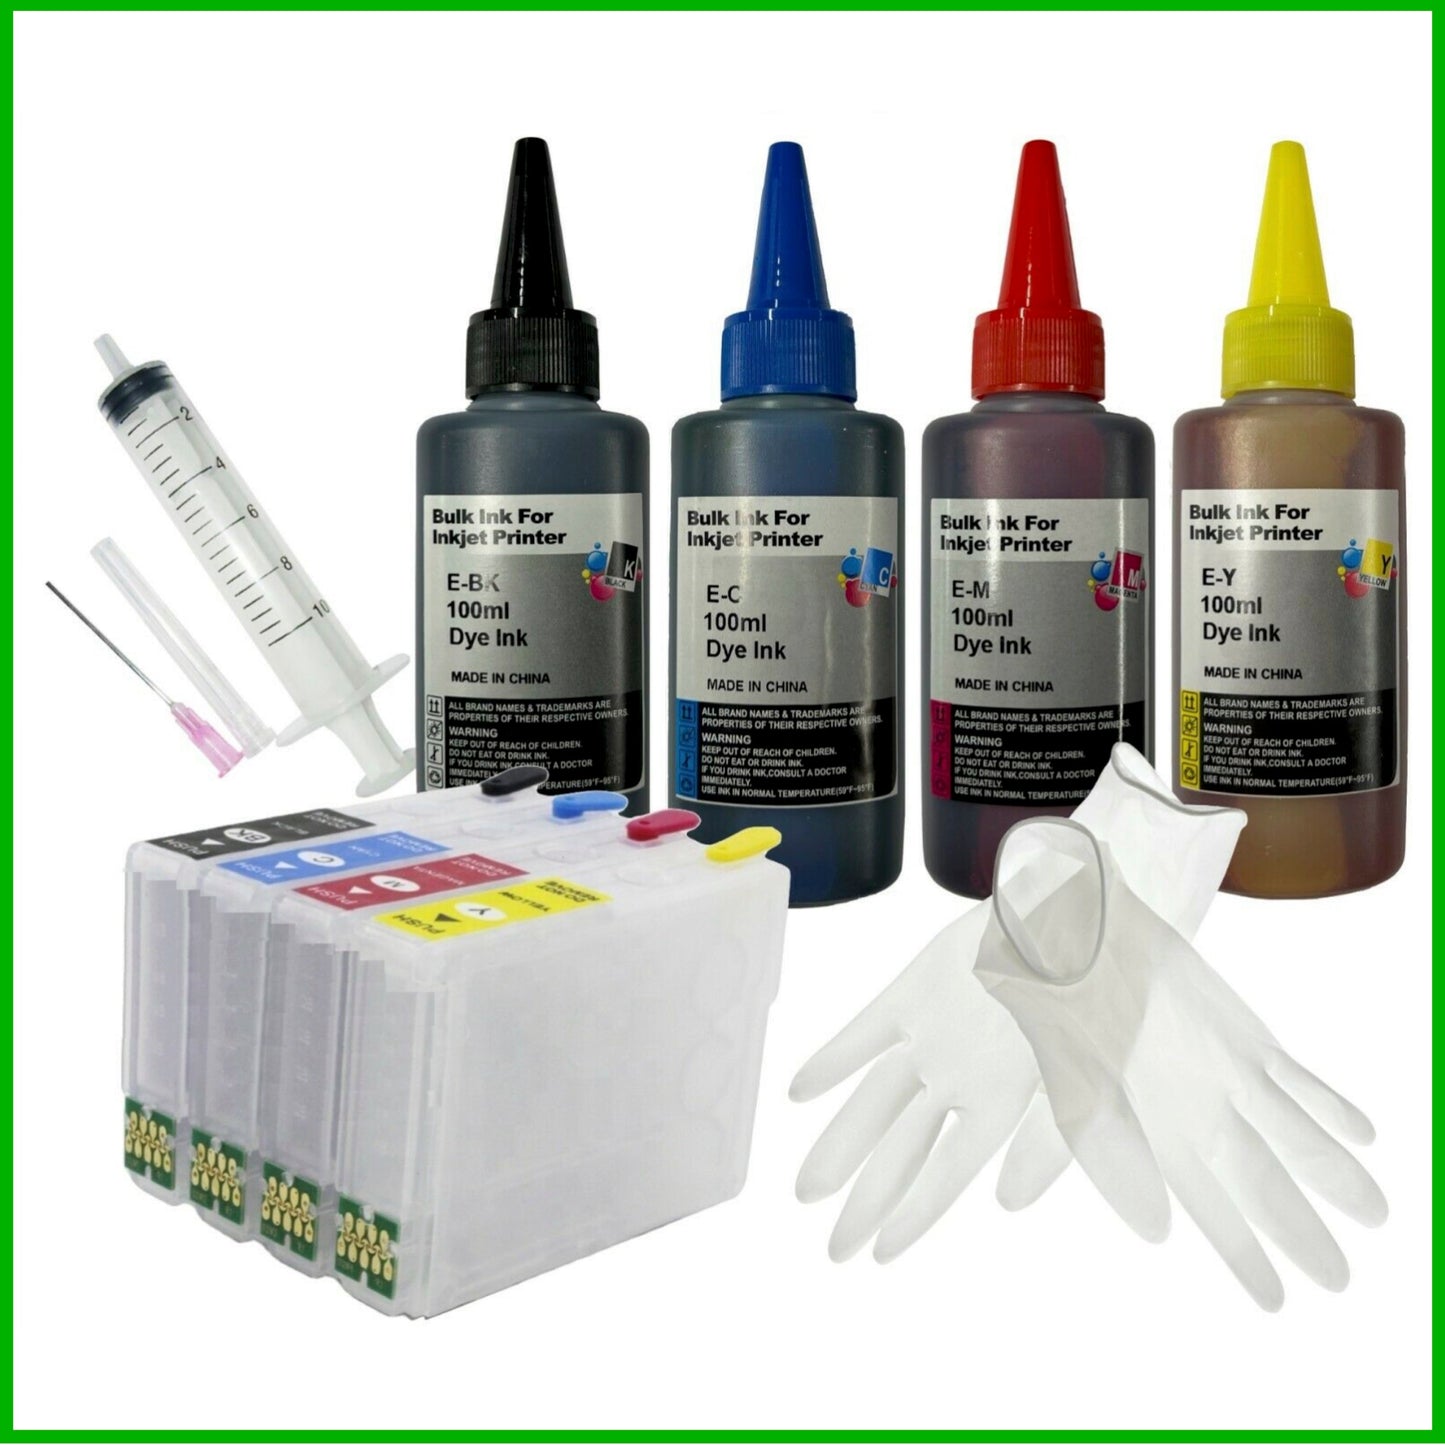 Refill Starter Kit - 503XL Refillable ARC Cartridges & Ink for Epson Expression Home